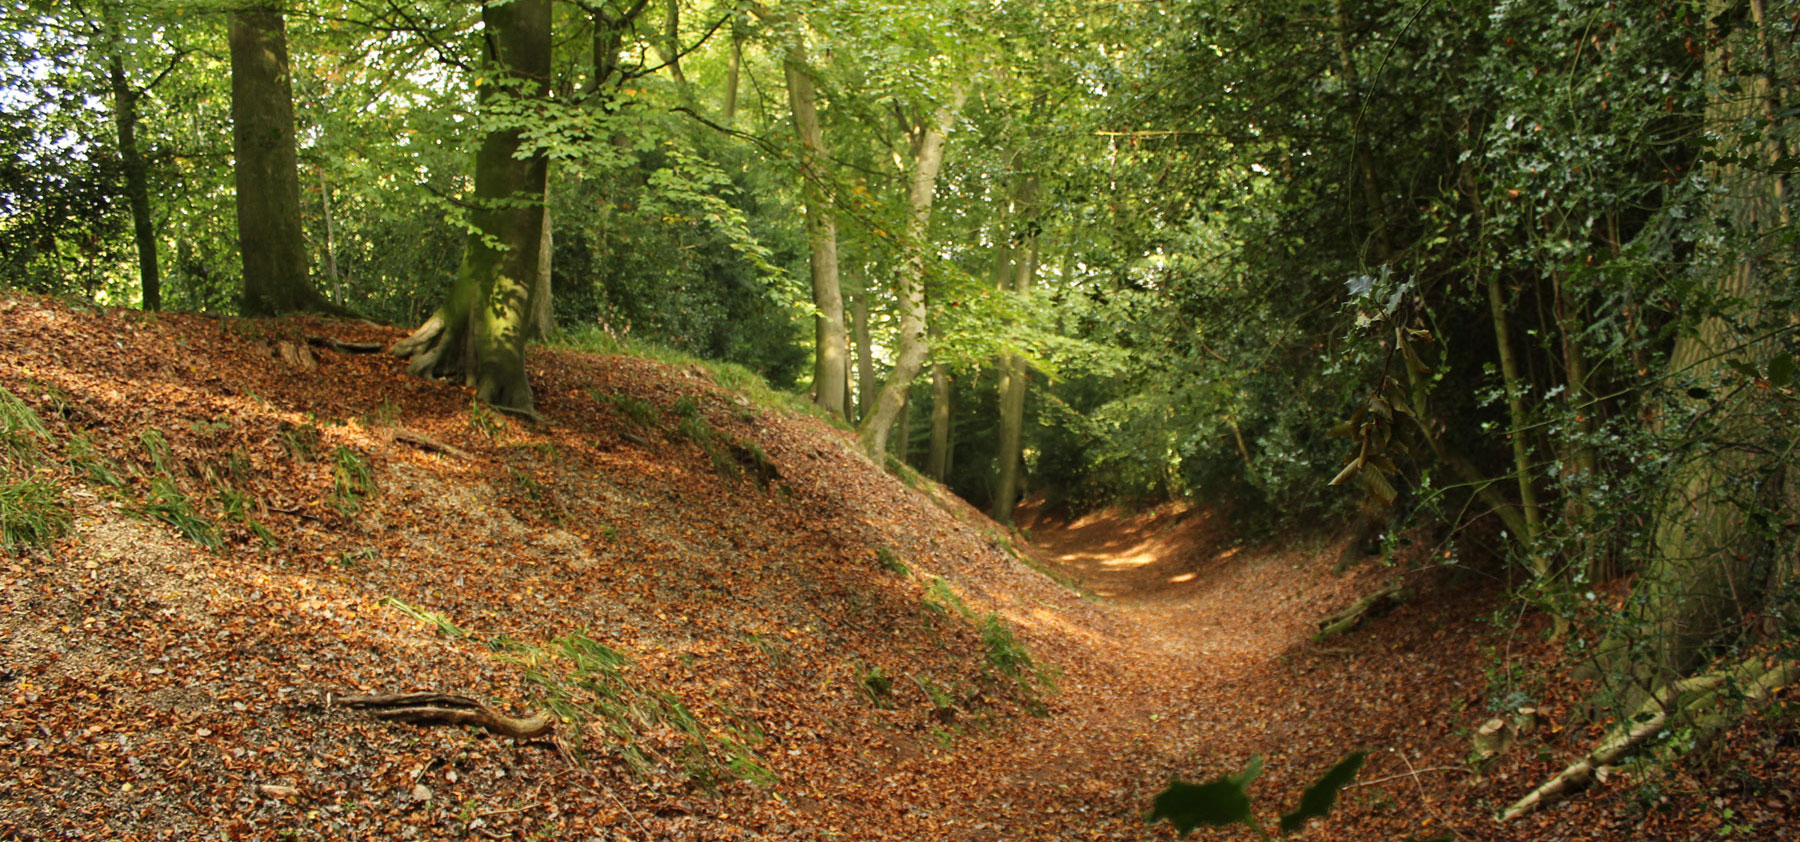 The impressive ditch that surrounds Cholesbury's Iron Age hillfort